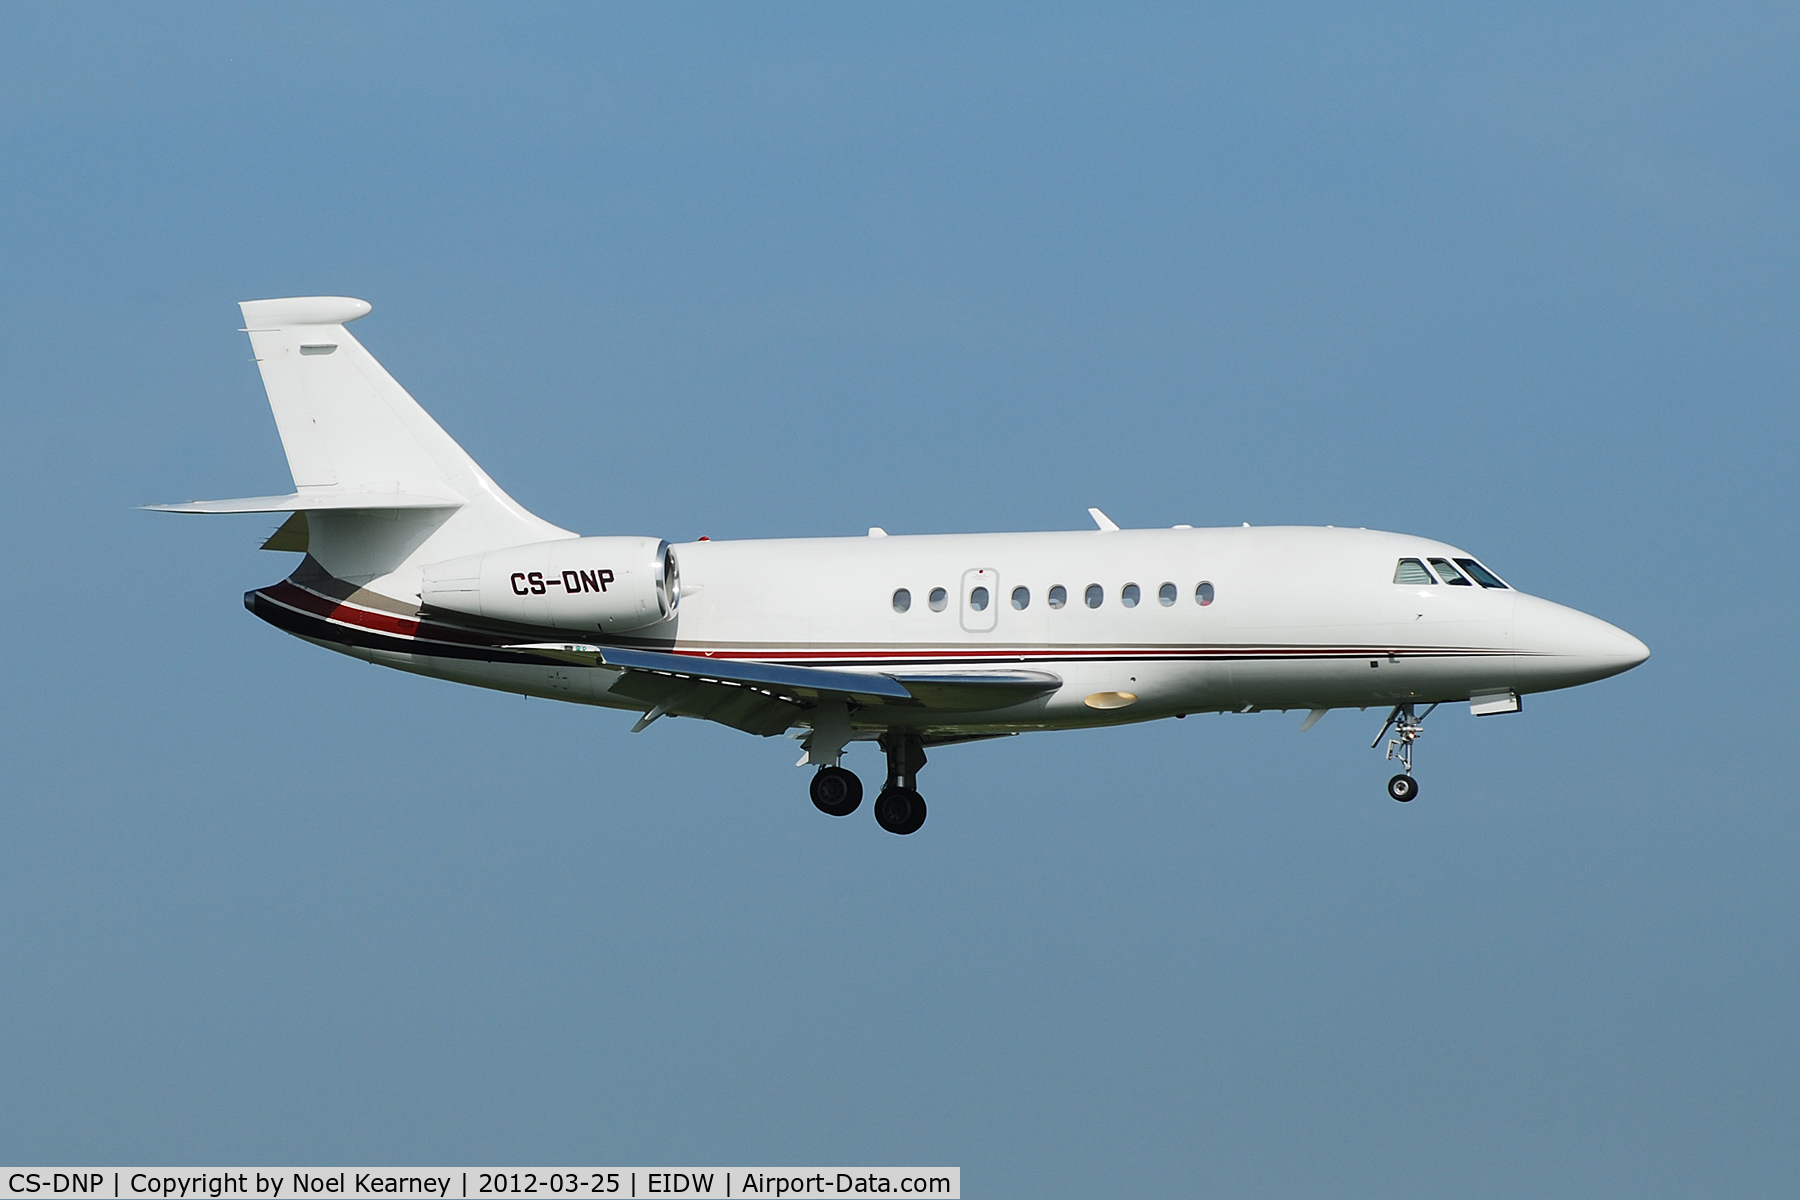 CS-DNP, 2000 Dassault Falcon 2000 C/N 109, Operated by Netjets this MY2000 is seen about to land on Rwy 10.